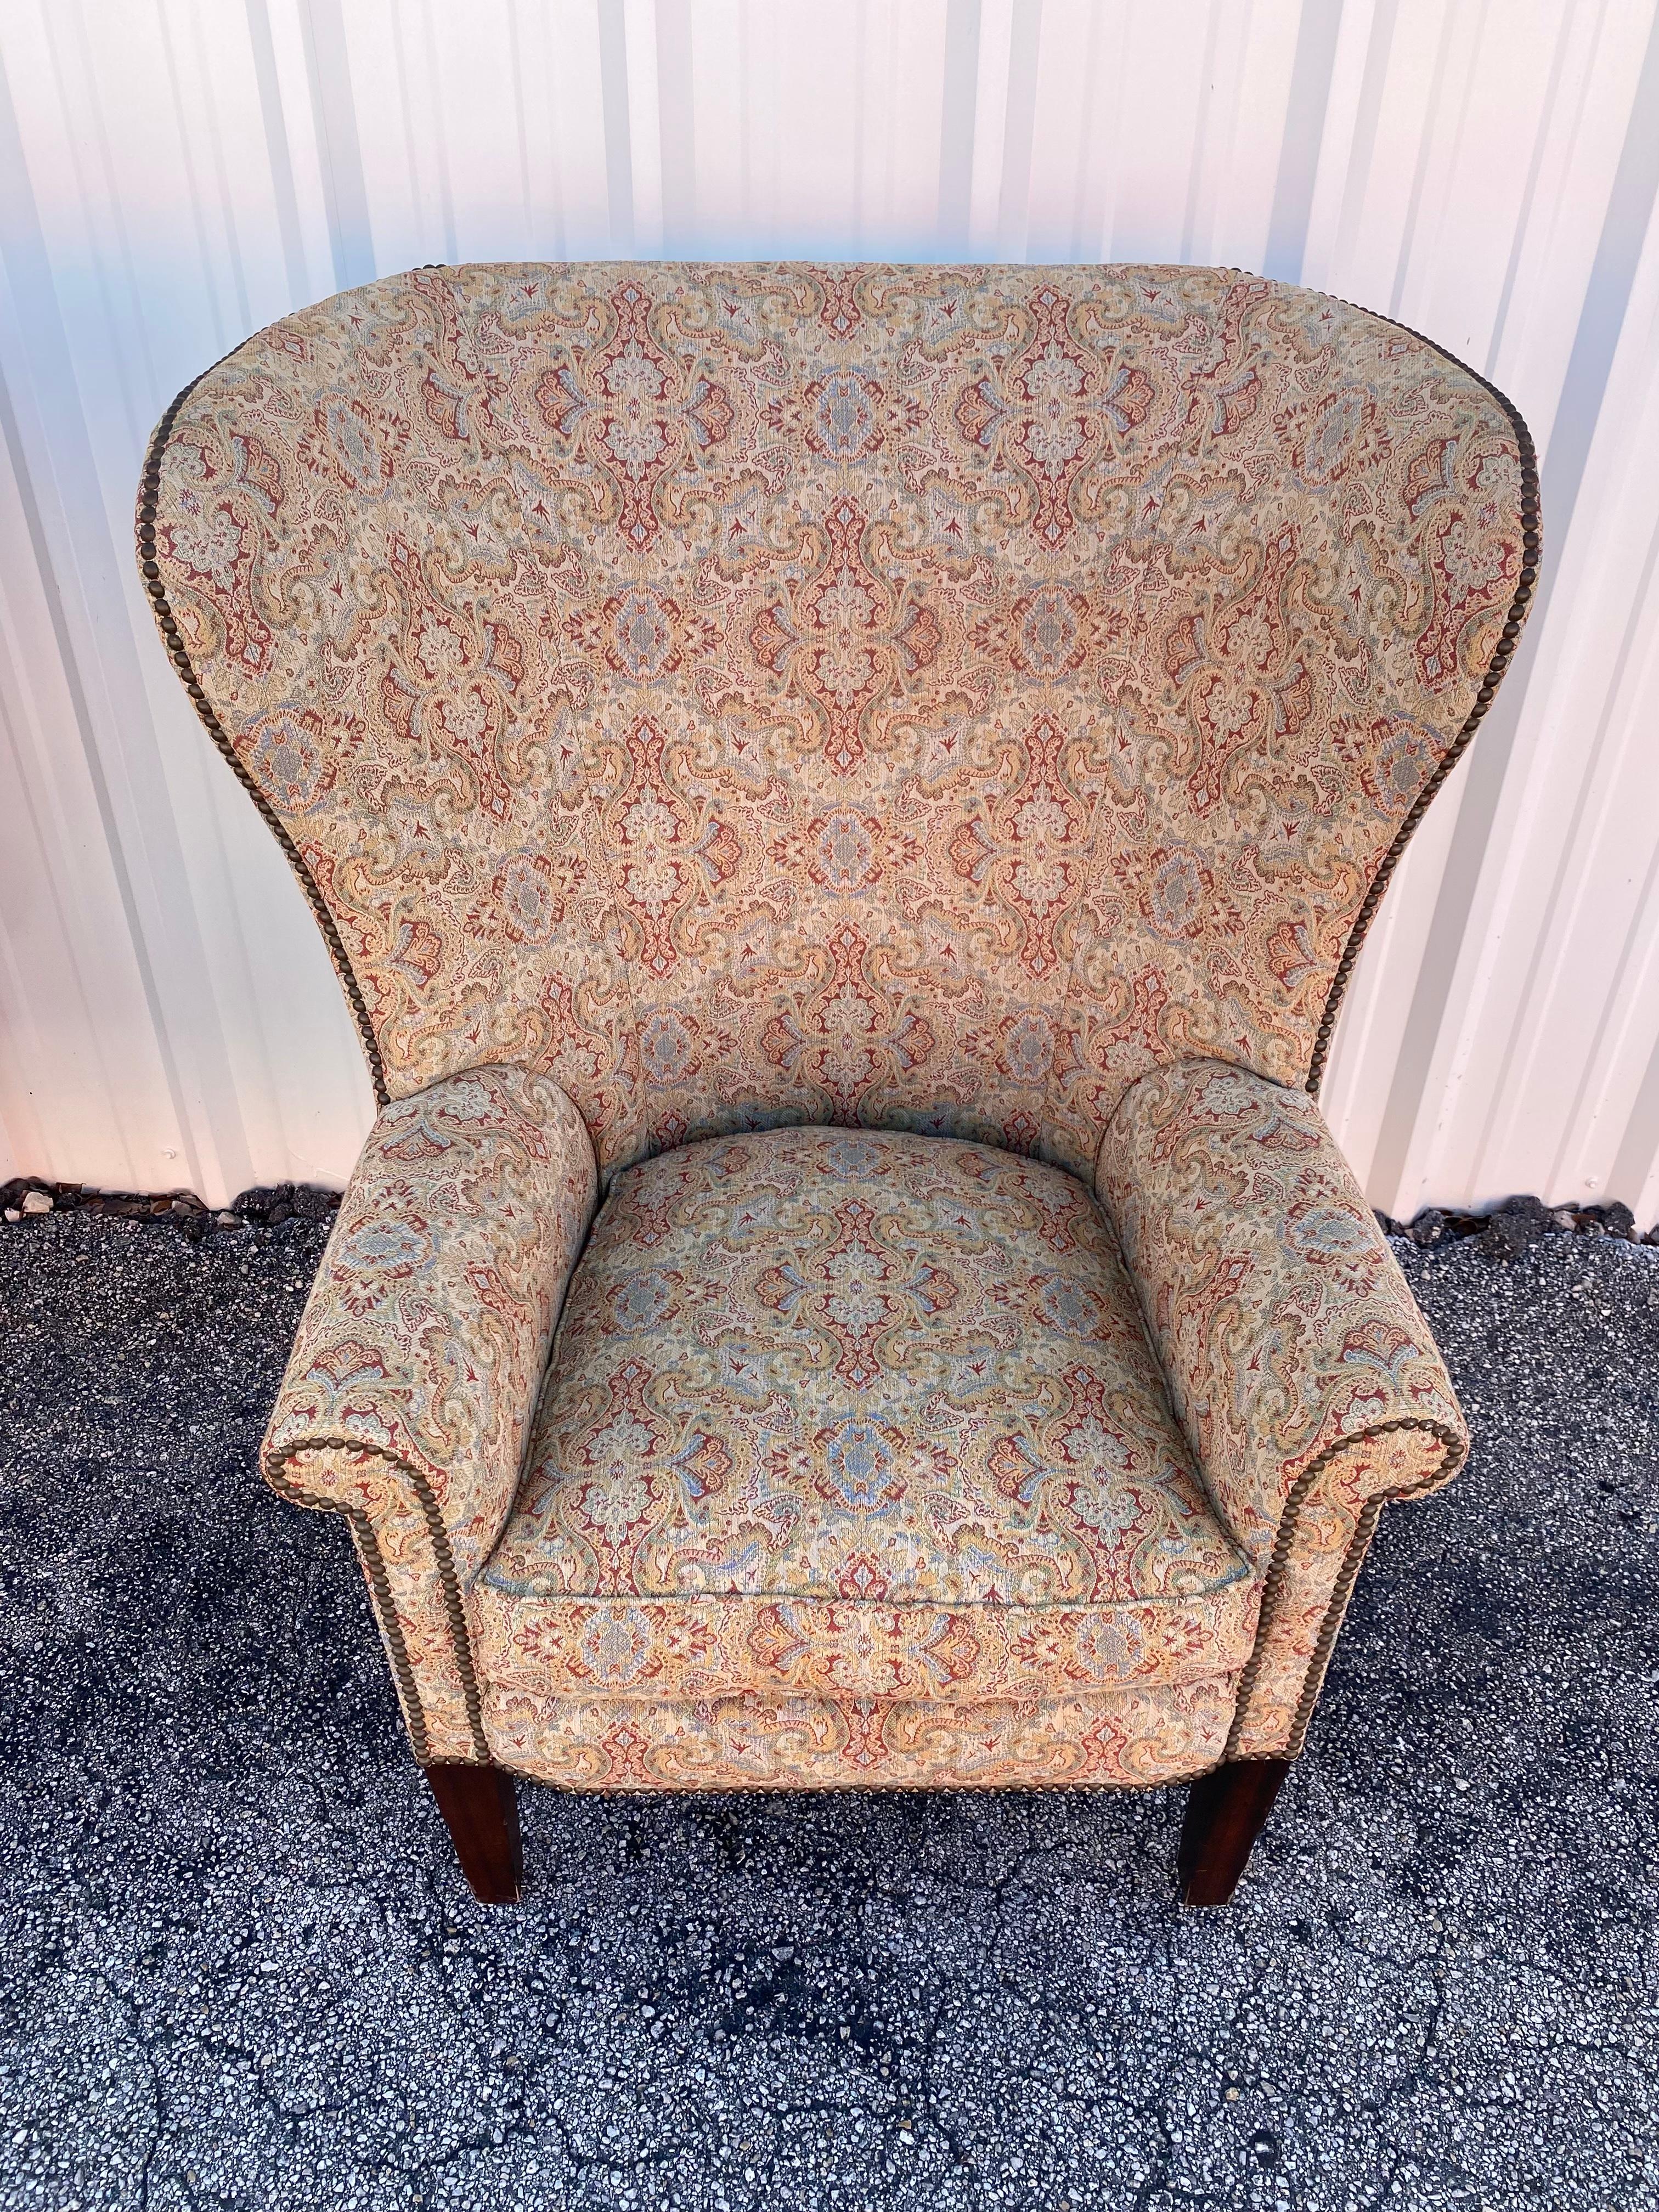 On offer on this occasion is one of the most stunning chairs you could hope to find. This is an ultra-rare opportunity to acquire what is, unequivocally, the best of the best, it being a most spectacular and beautifully-presented chairs. Outstanding